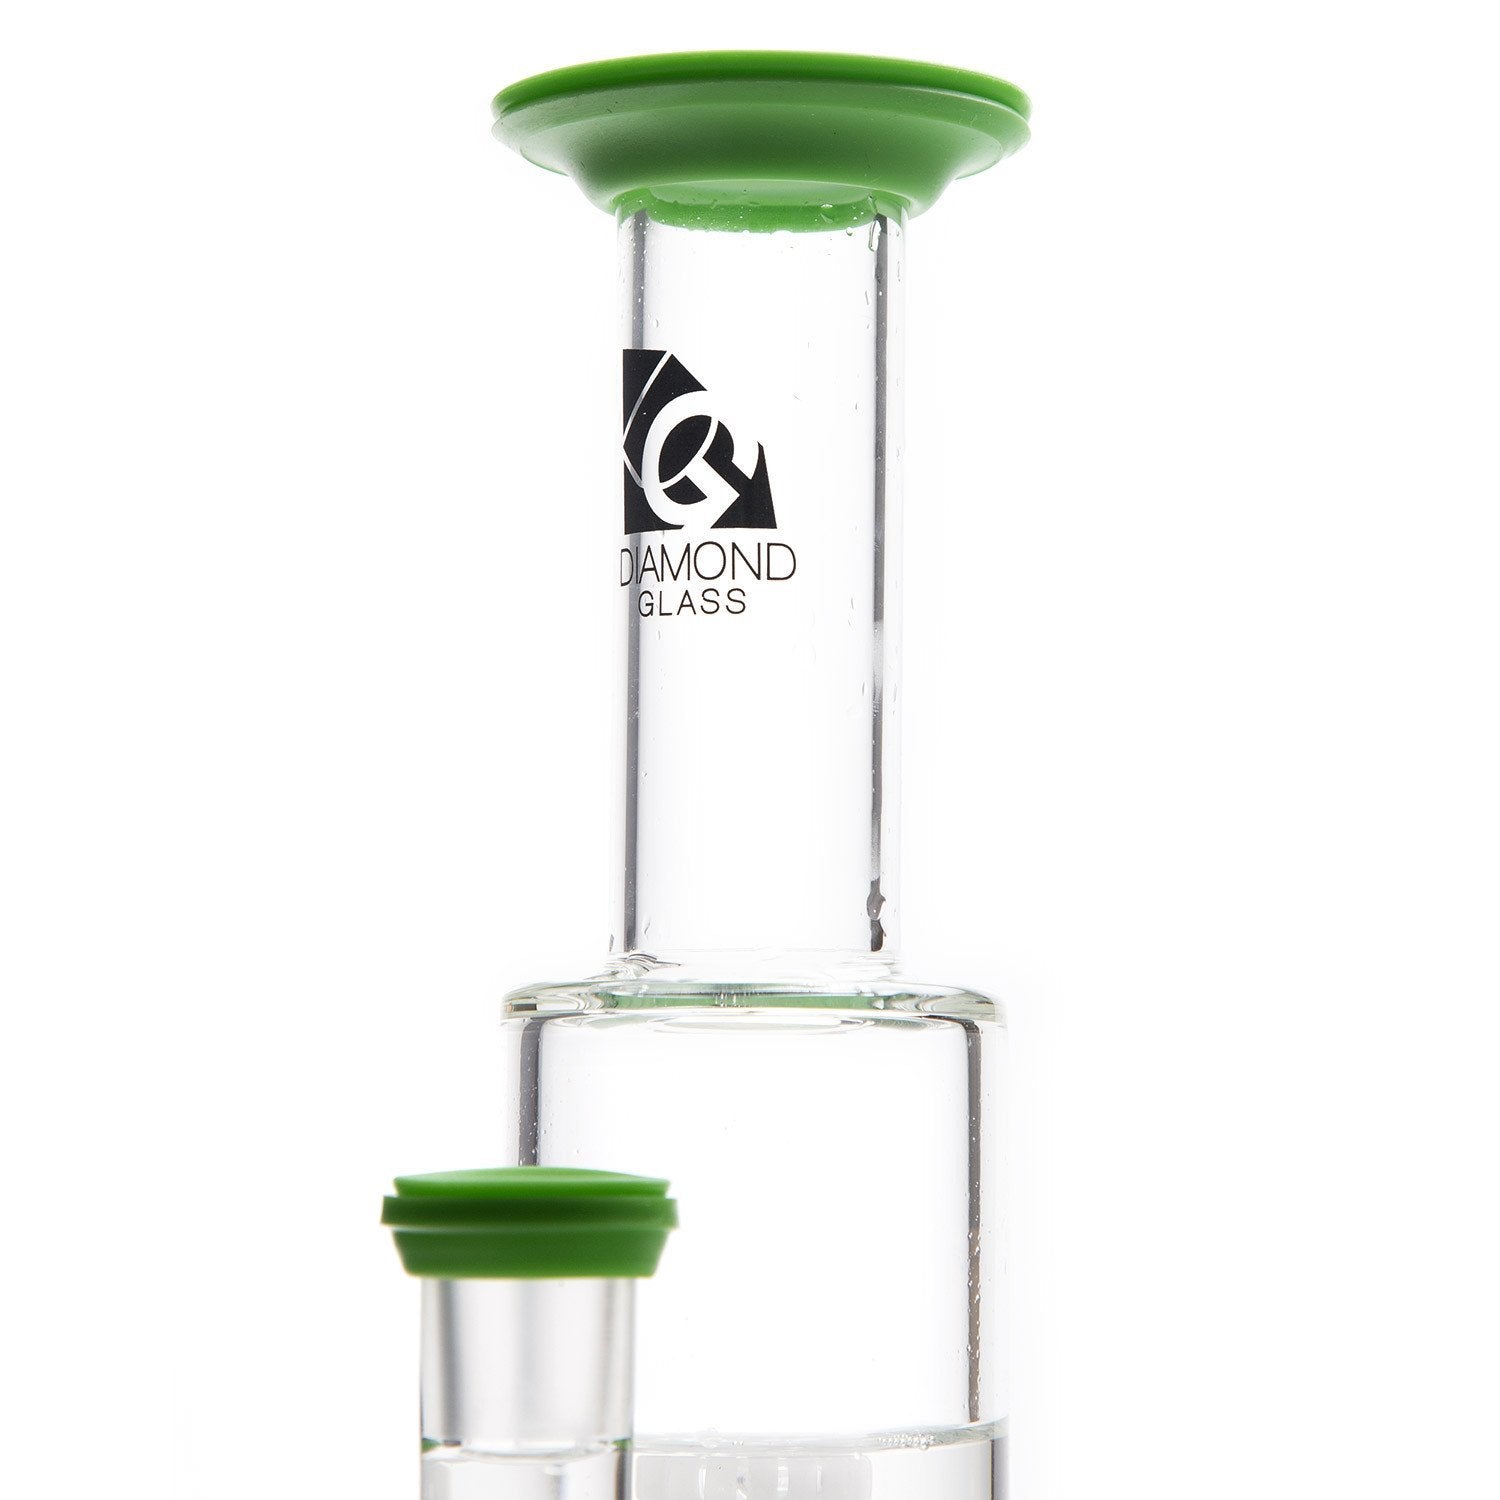 Resolution Res Caps Bong Cleaning Caps - 420 Science - The most trusted online smoke shop.